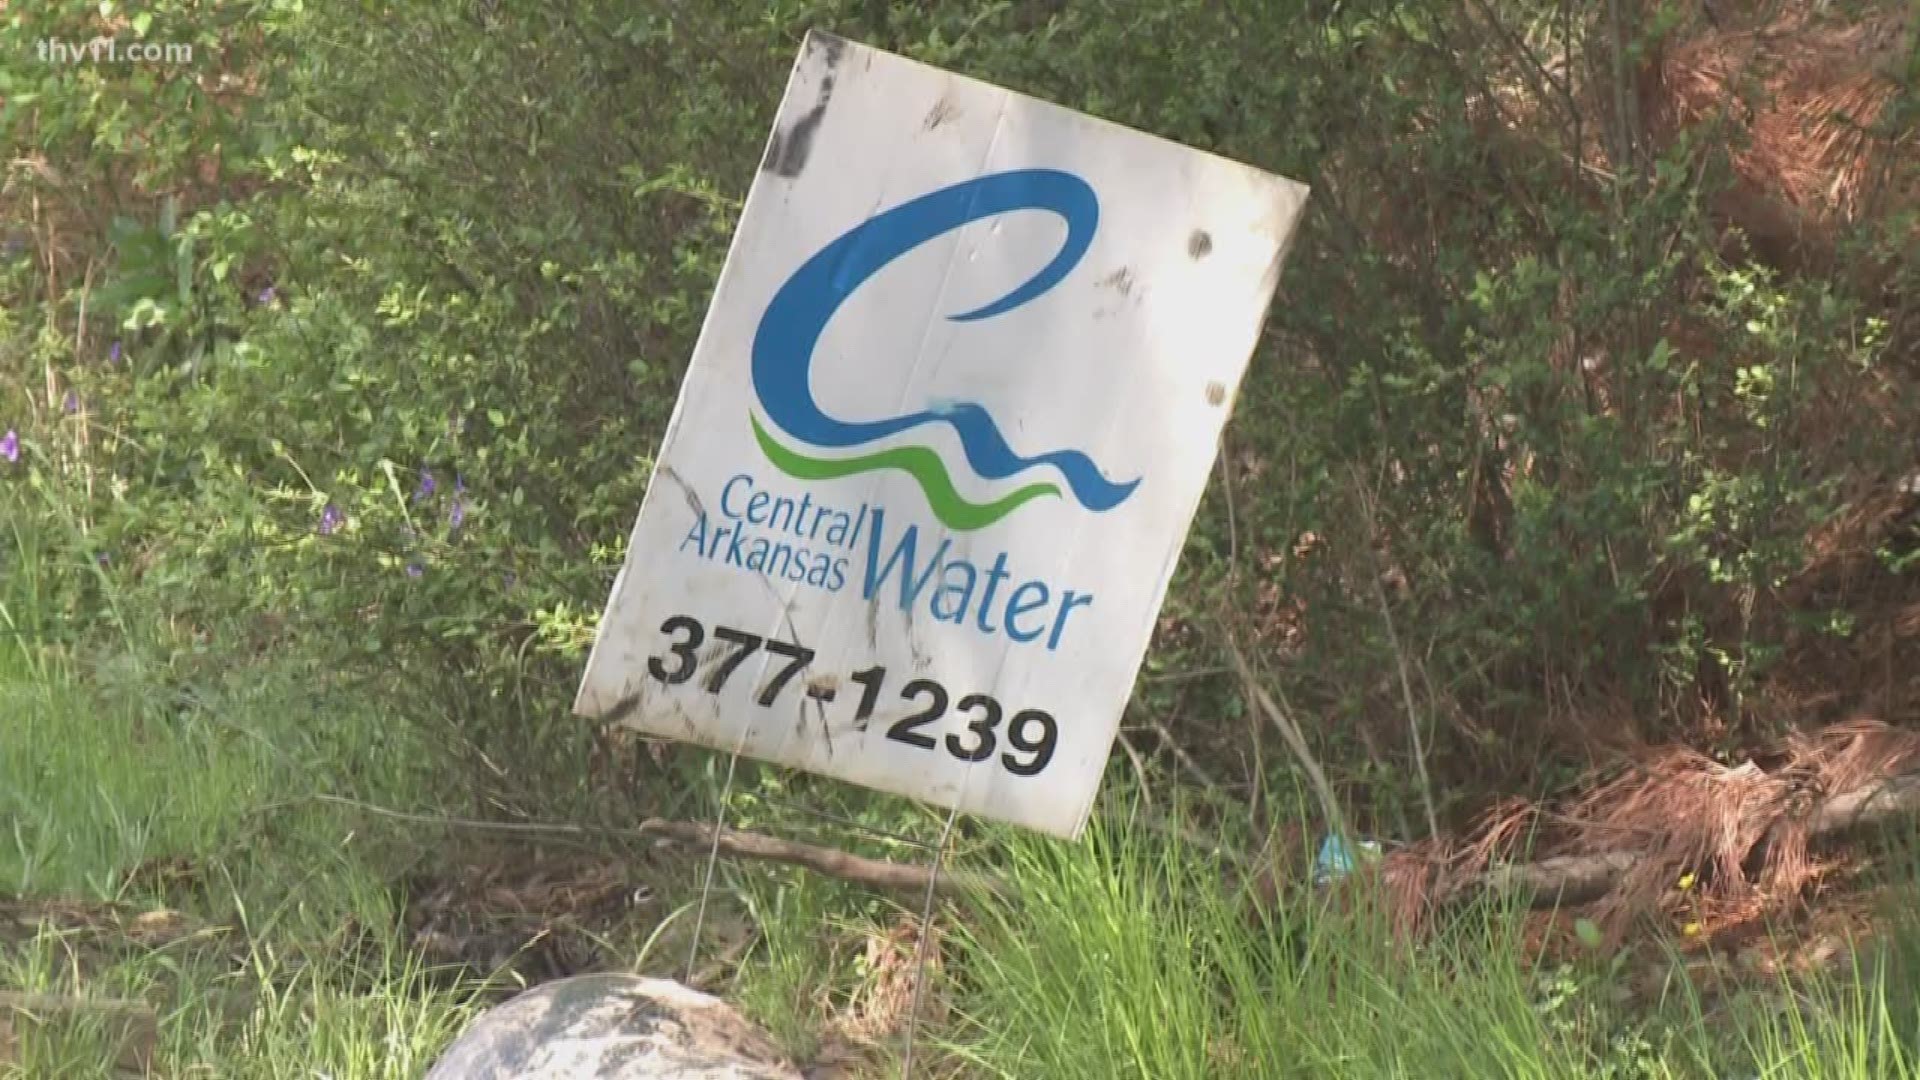 The leaves falling on the ground are creating a unique problem for the Central Arkansas Water company.